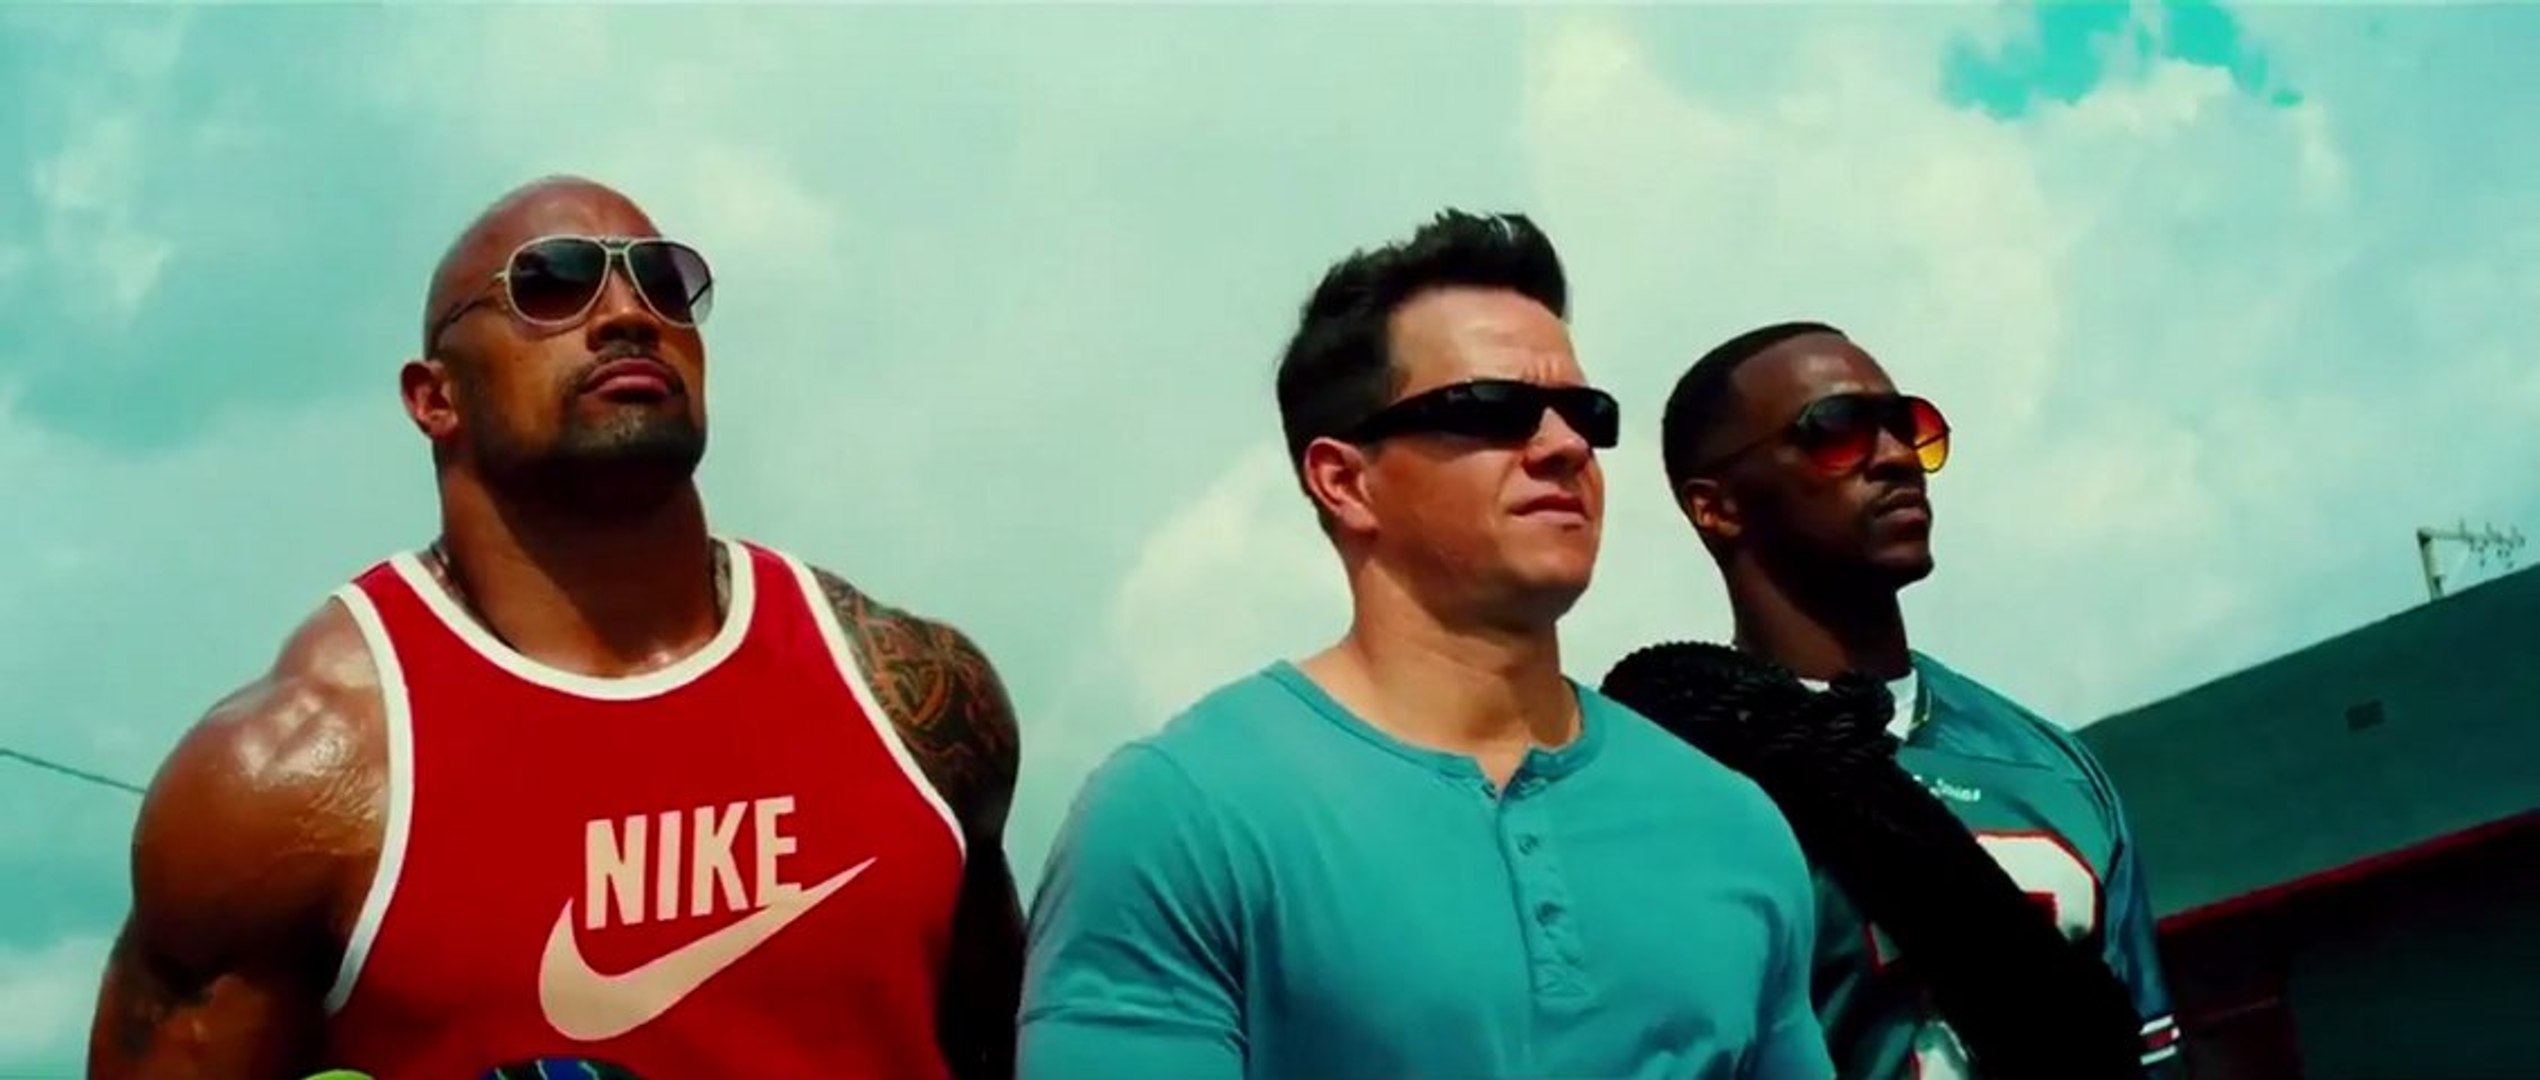 Michael Bay's Pain & Gain - Official Trailer - video Dailymotion